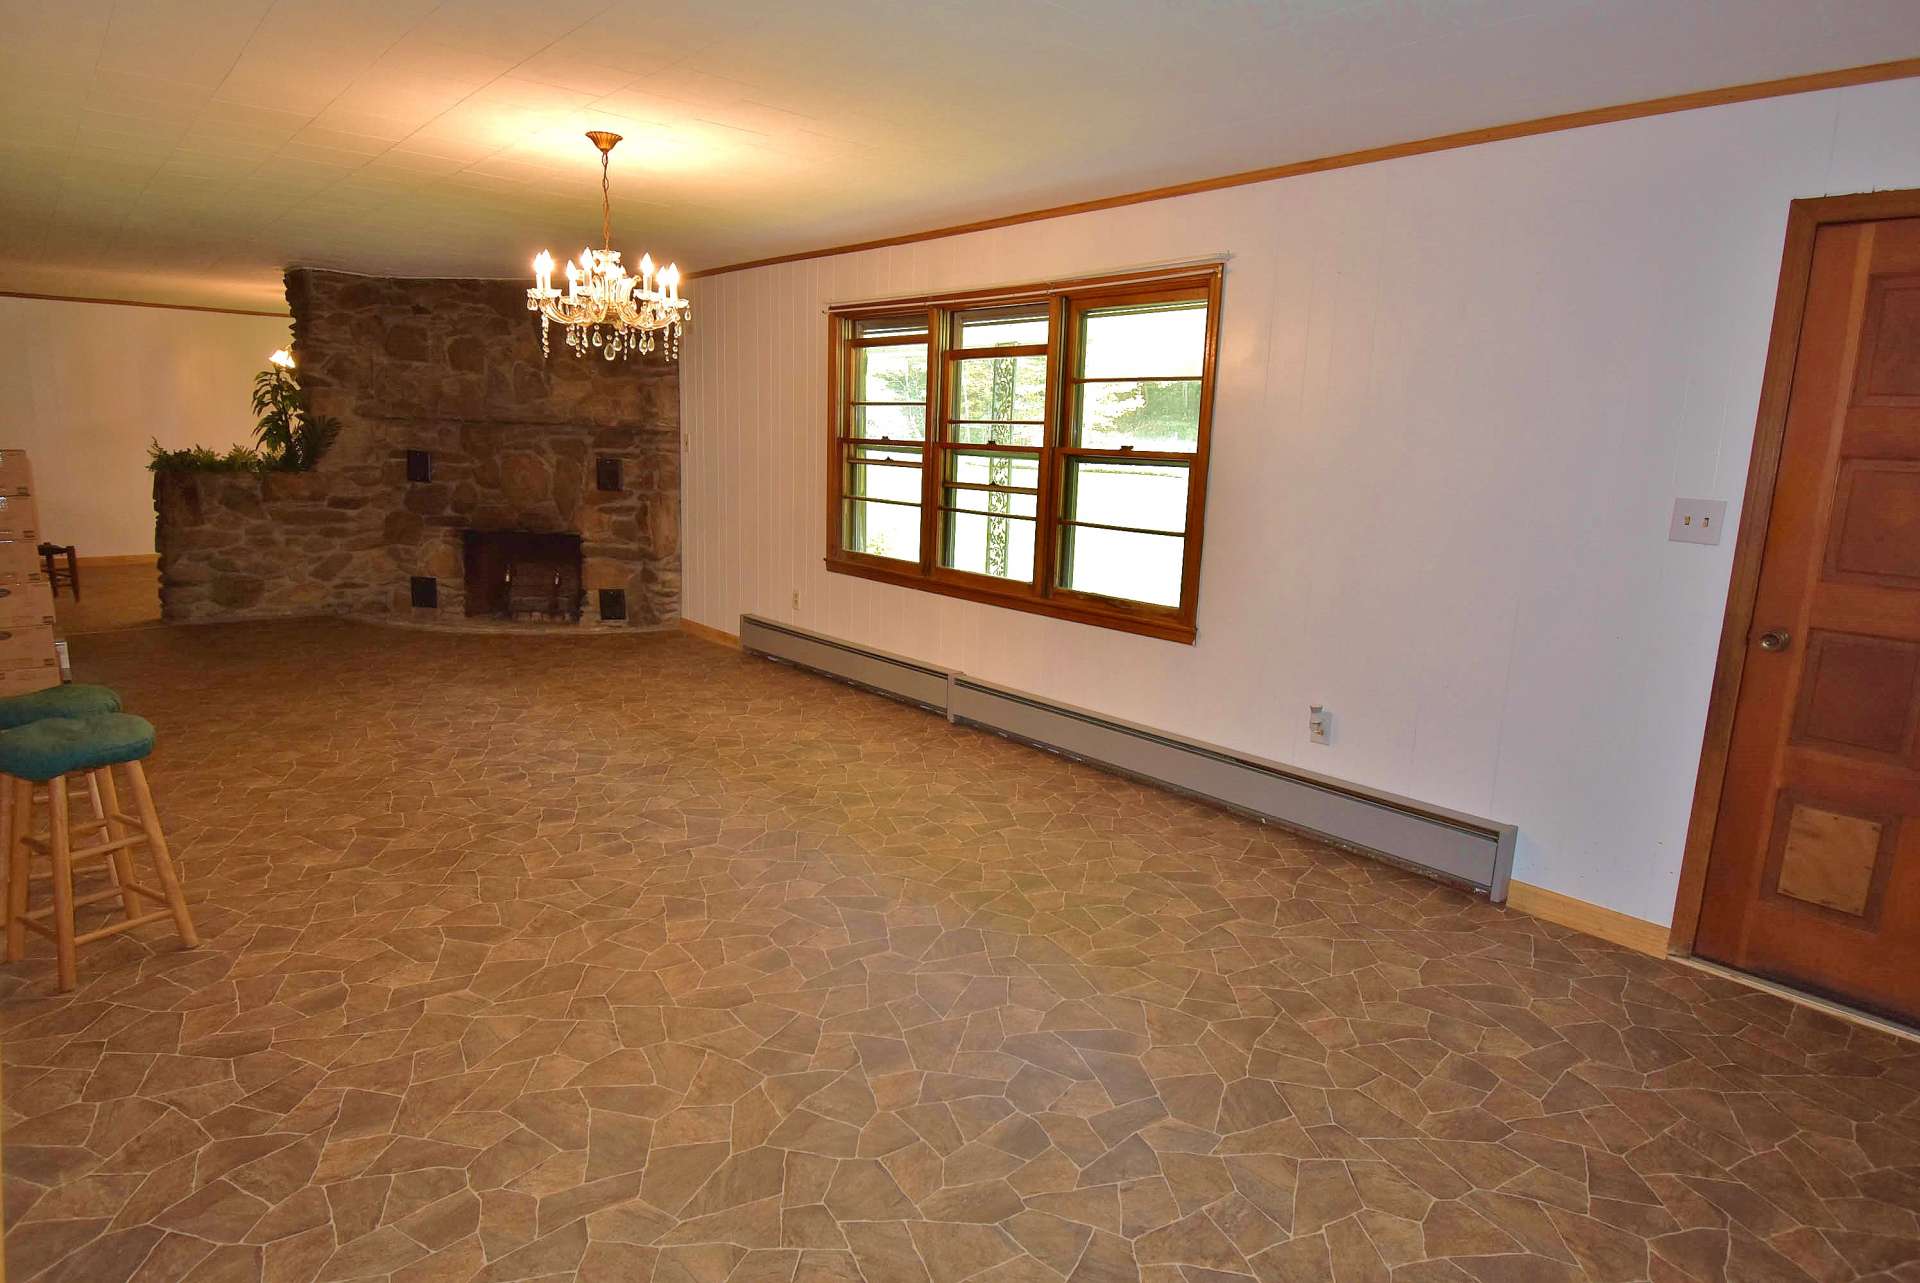 A large living room features new flooring and a unique stone wood burning fireplace as the focal point of the room.